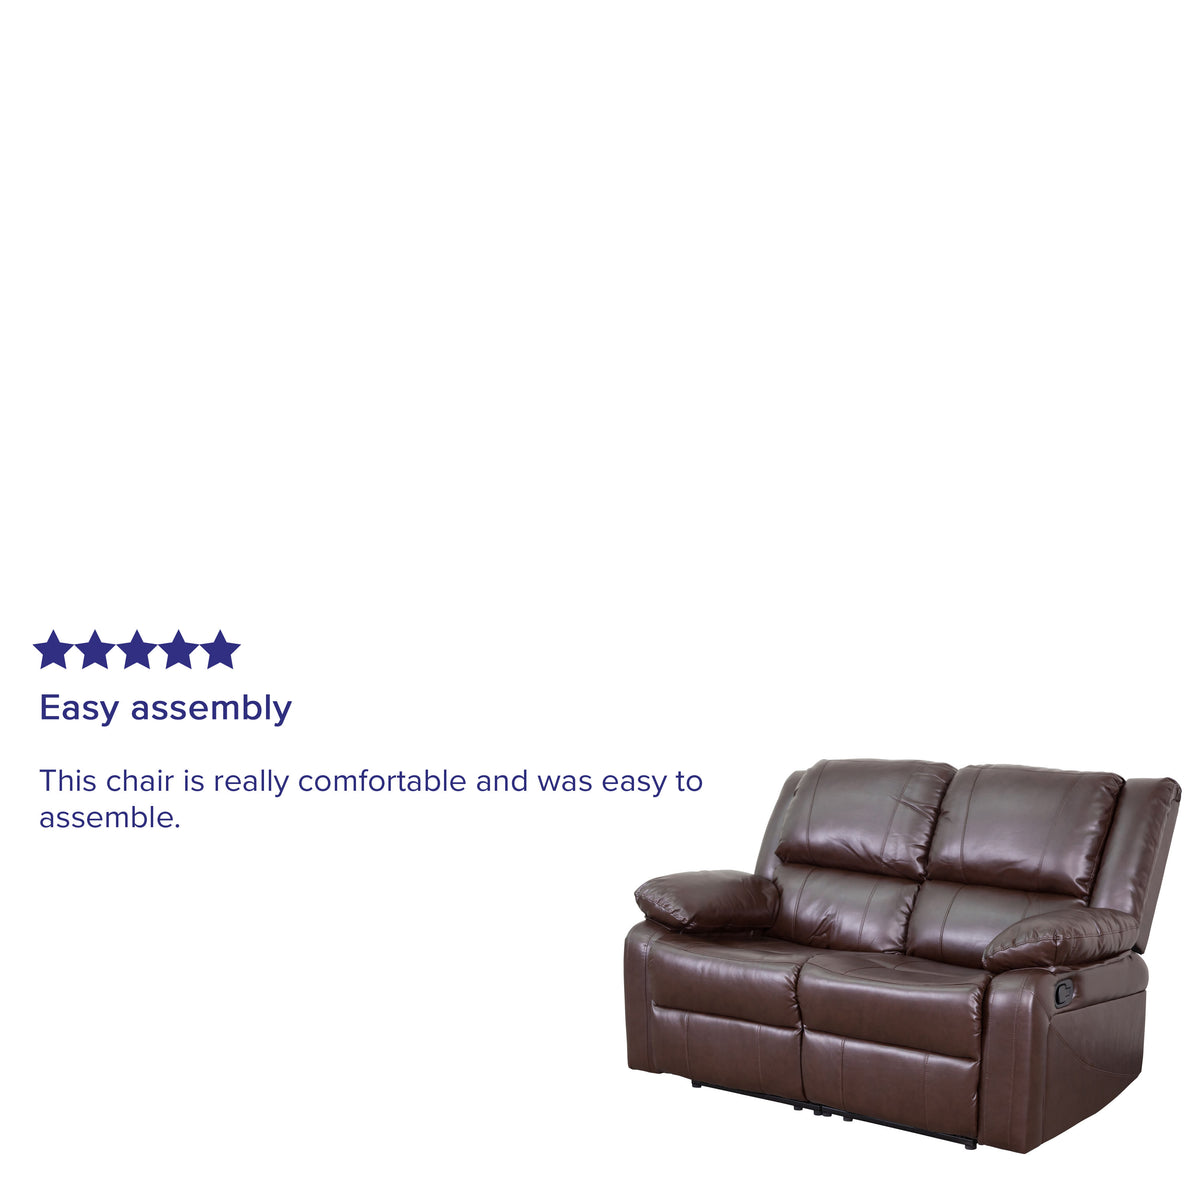 Brown LeatherSoft |#| Brown LeatherSoft Pillow Back Loveseat with Two Built-In Recliners - Padded Arms